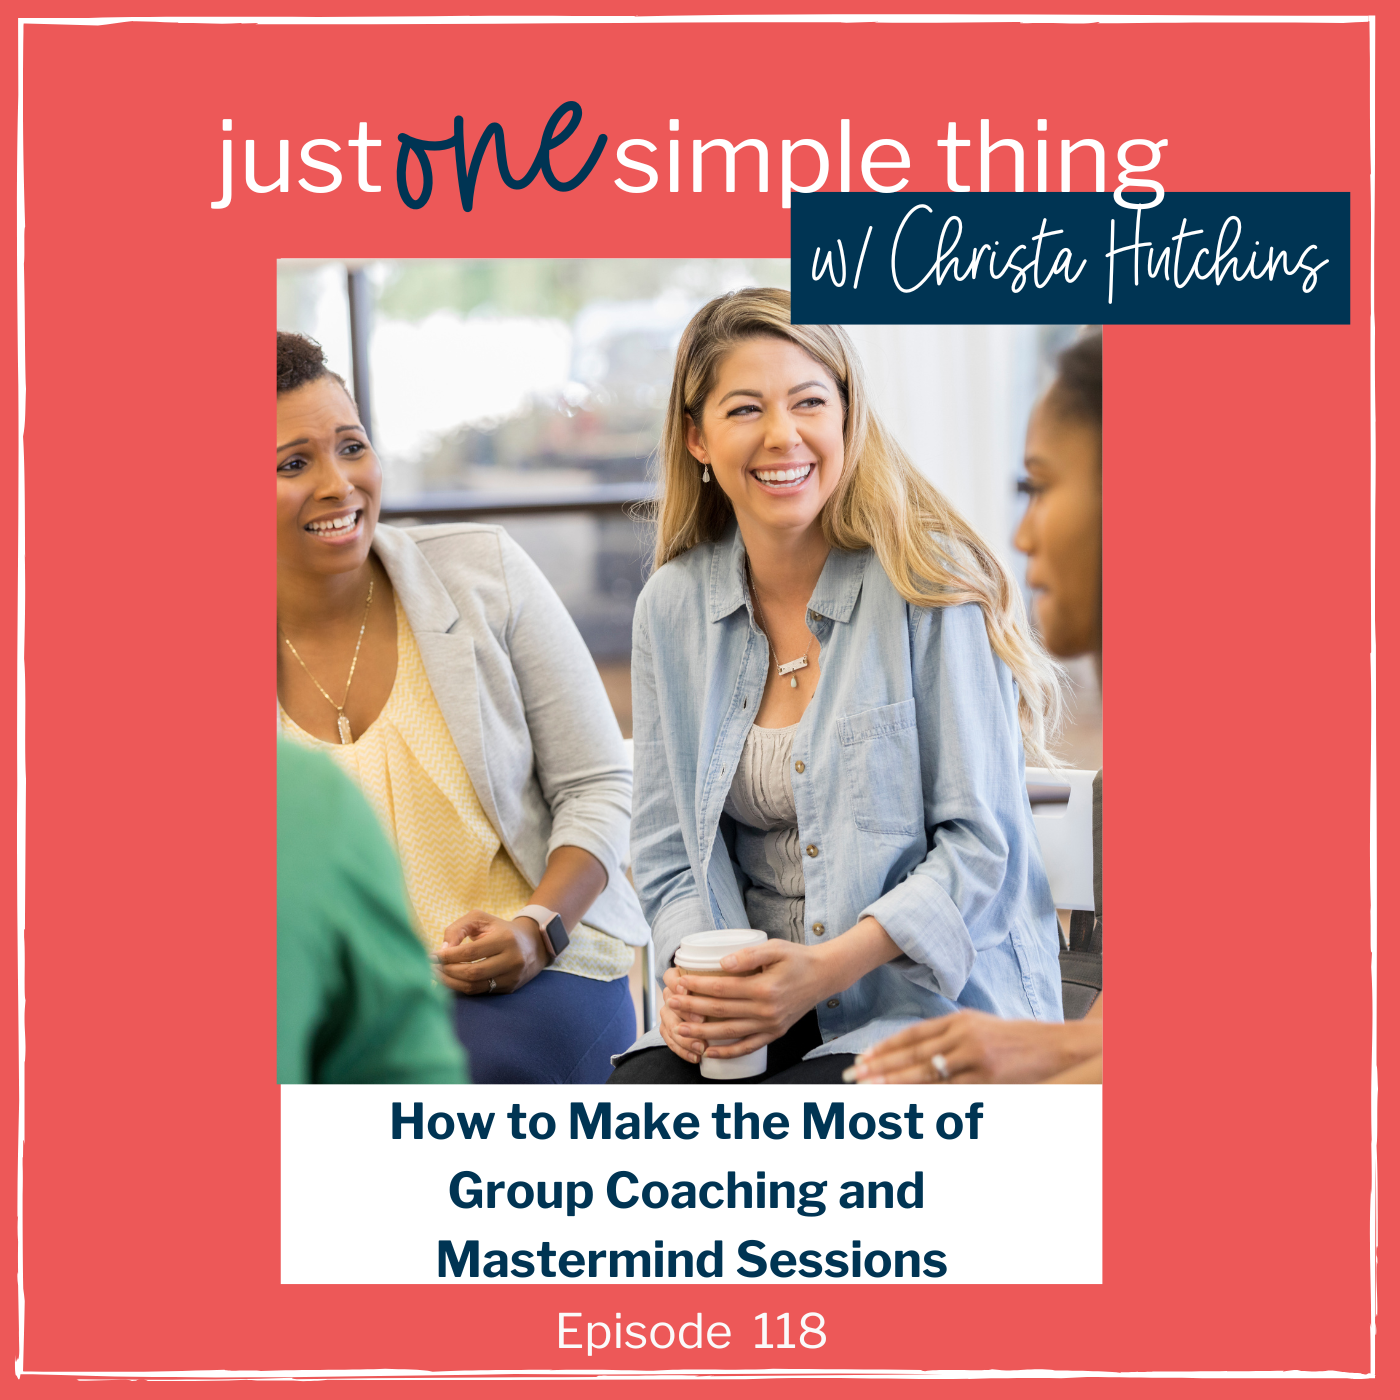 How to Make the Most of Group Coaching and Mastermind Sessions